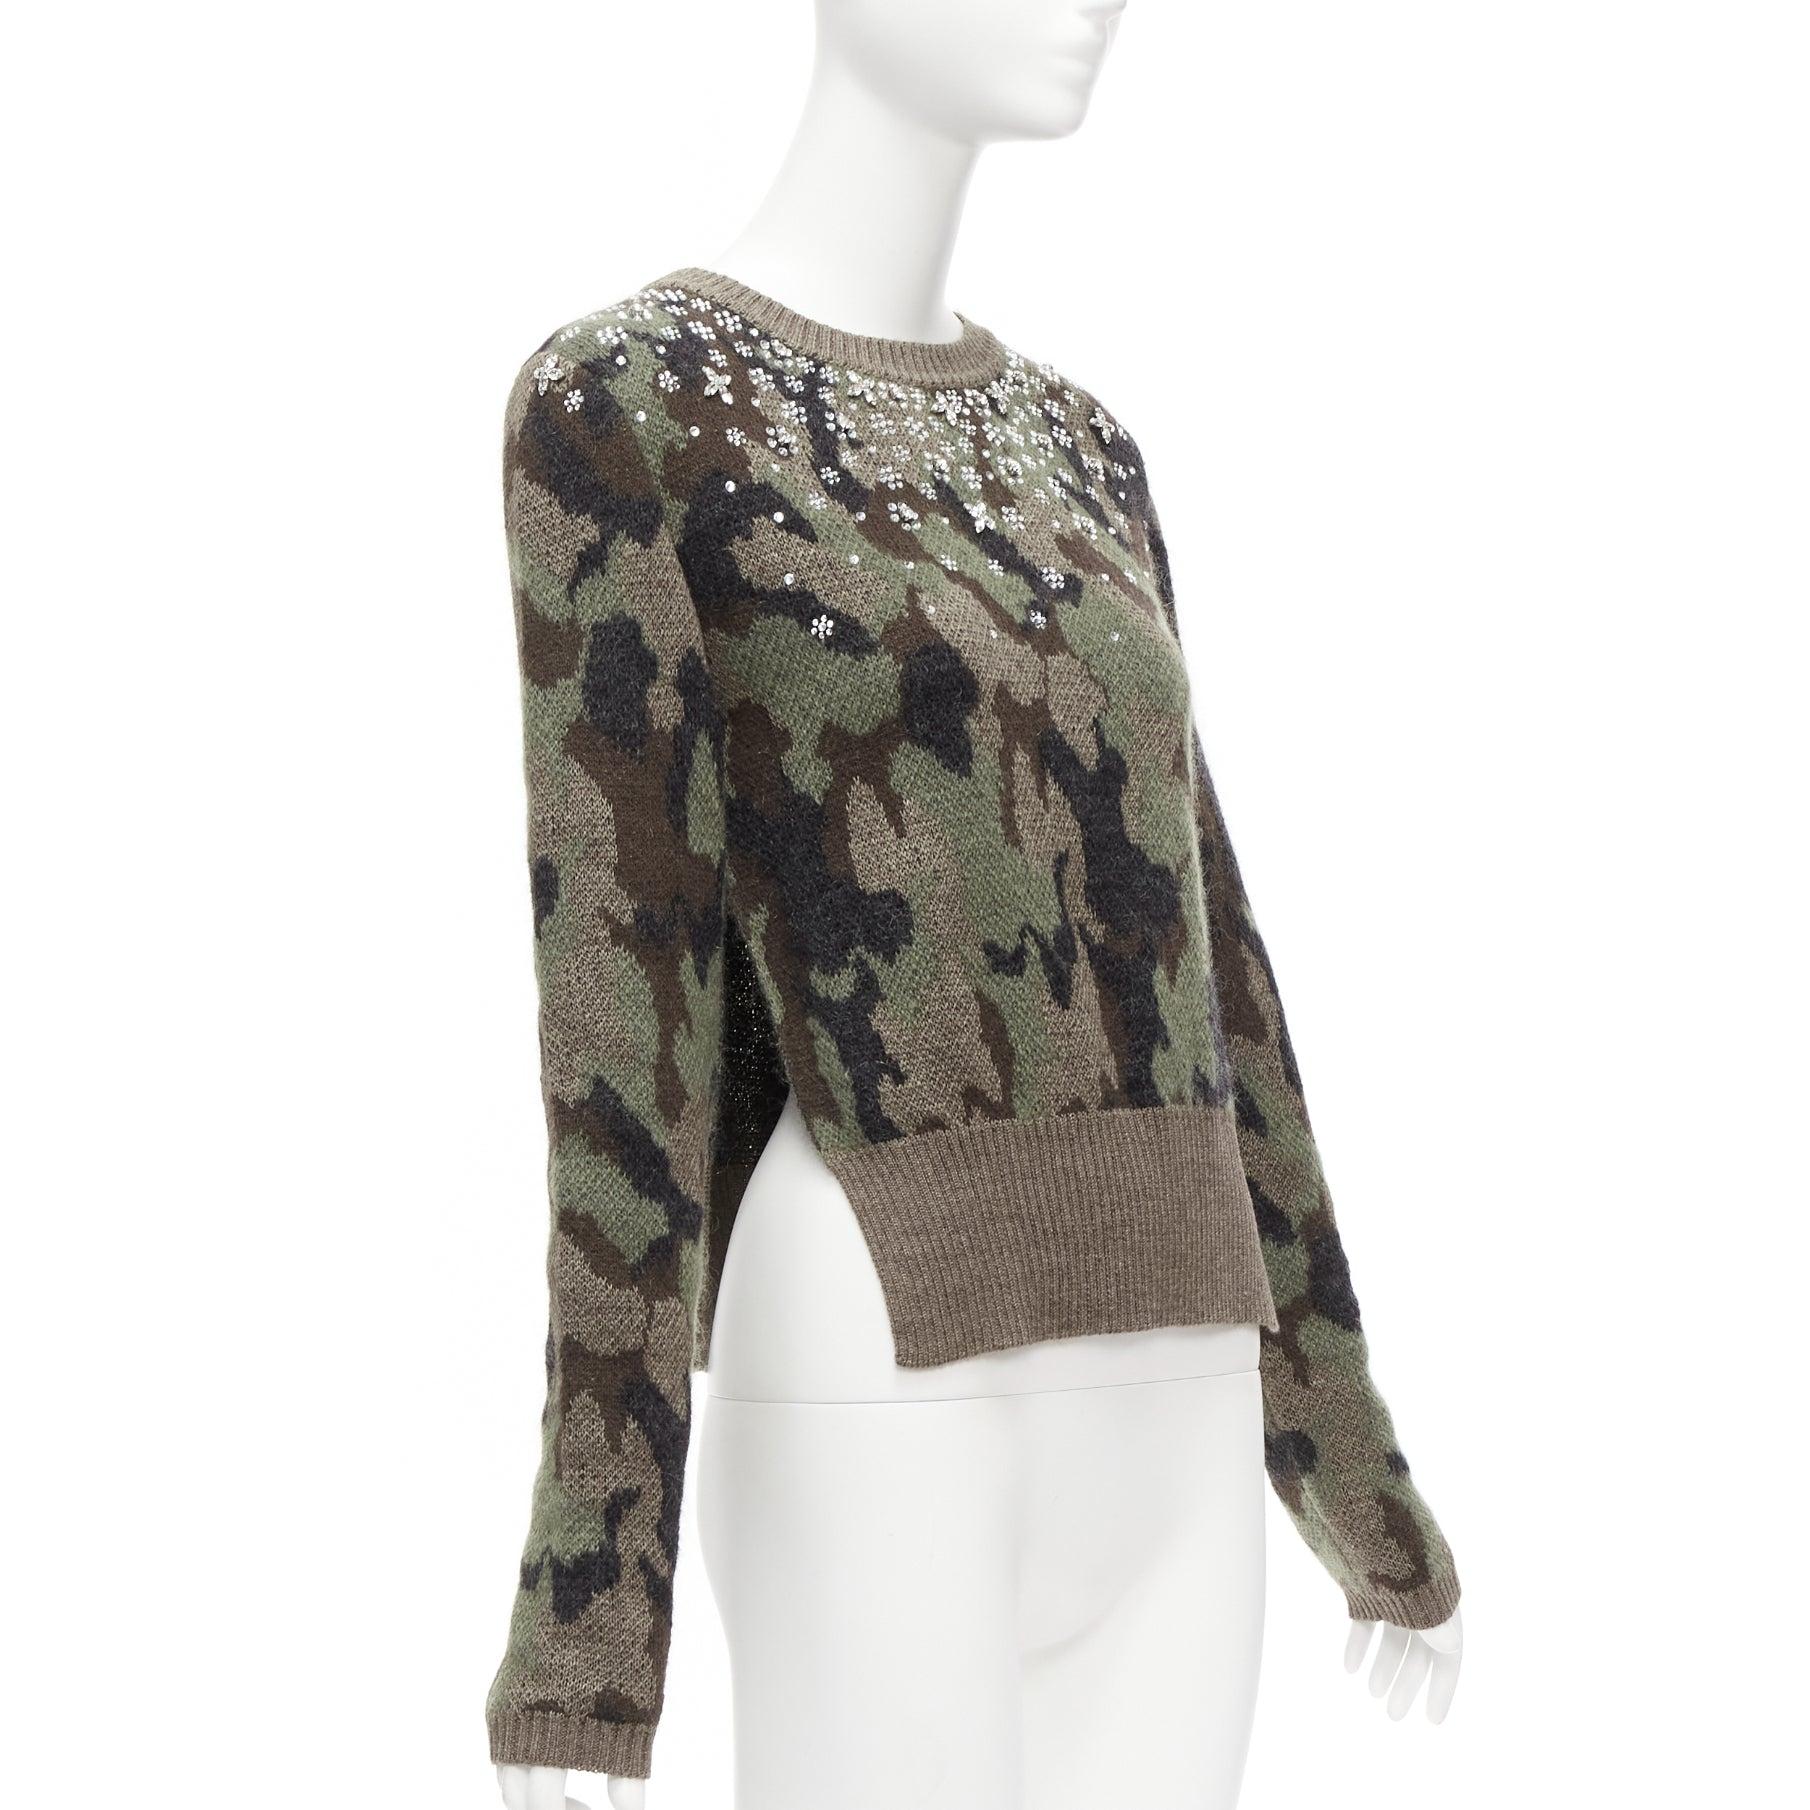 GIAMBATTISTA VALLI 2021 green camouflage mohair crystal jewel sweater IT42 S
Reference: AAWC/A00652
Brand: Giambattista Valli
Collection: 2019
Material: Mohair, Blend
Color: Green
Pattern: Camouflage
Extra Details: Crew neck. Crystal embellishment